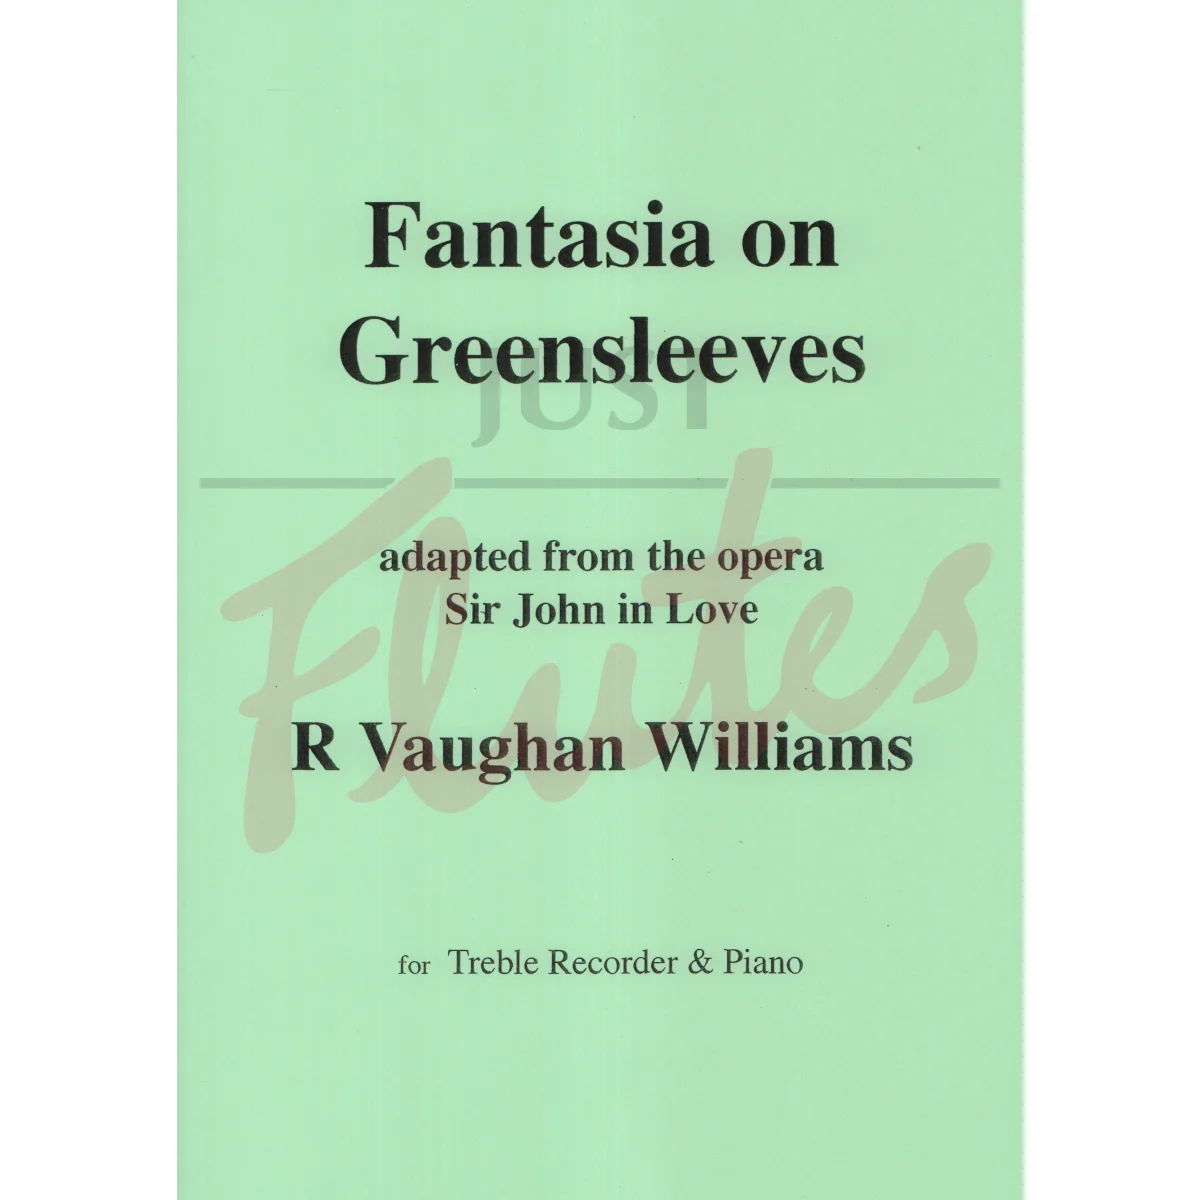 Fantasia on Greensleeves for Treble Recorder and Piano